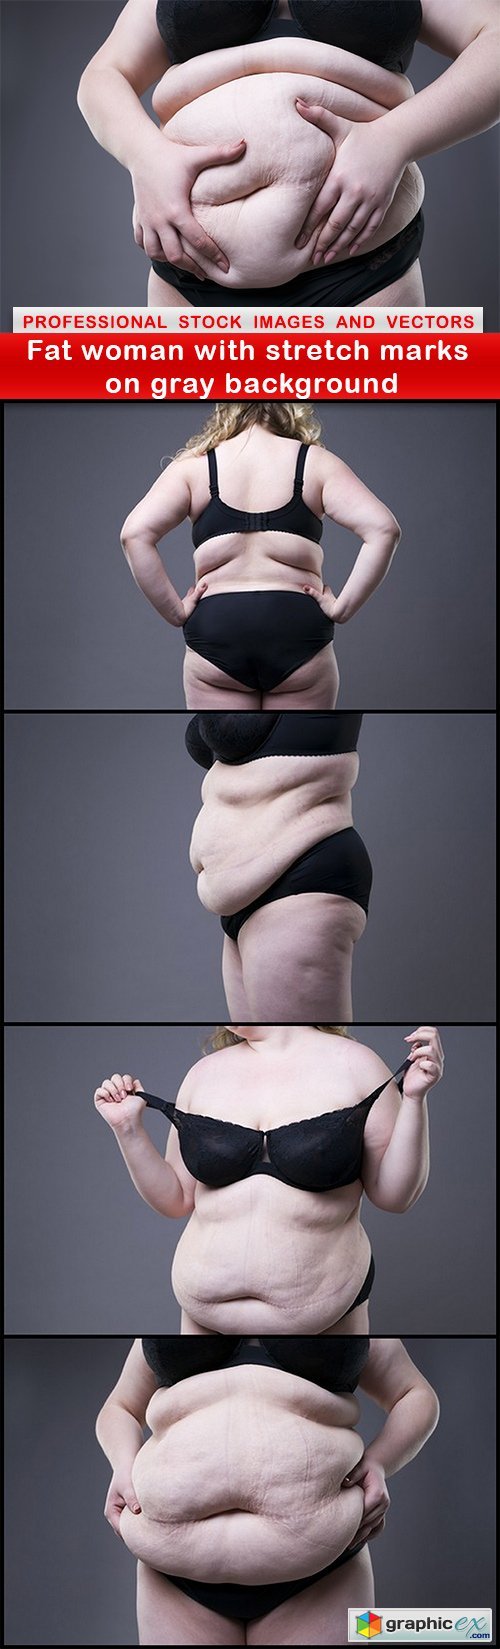 Fat woman with stretch marks on gray background - 5 UHQ JPEG